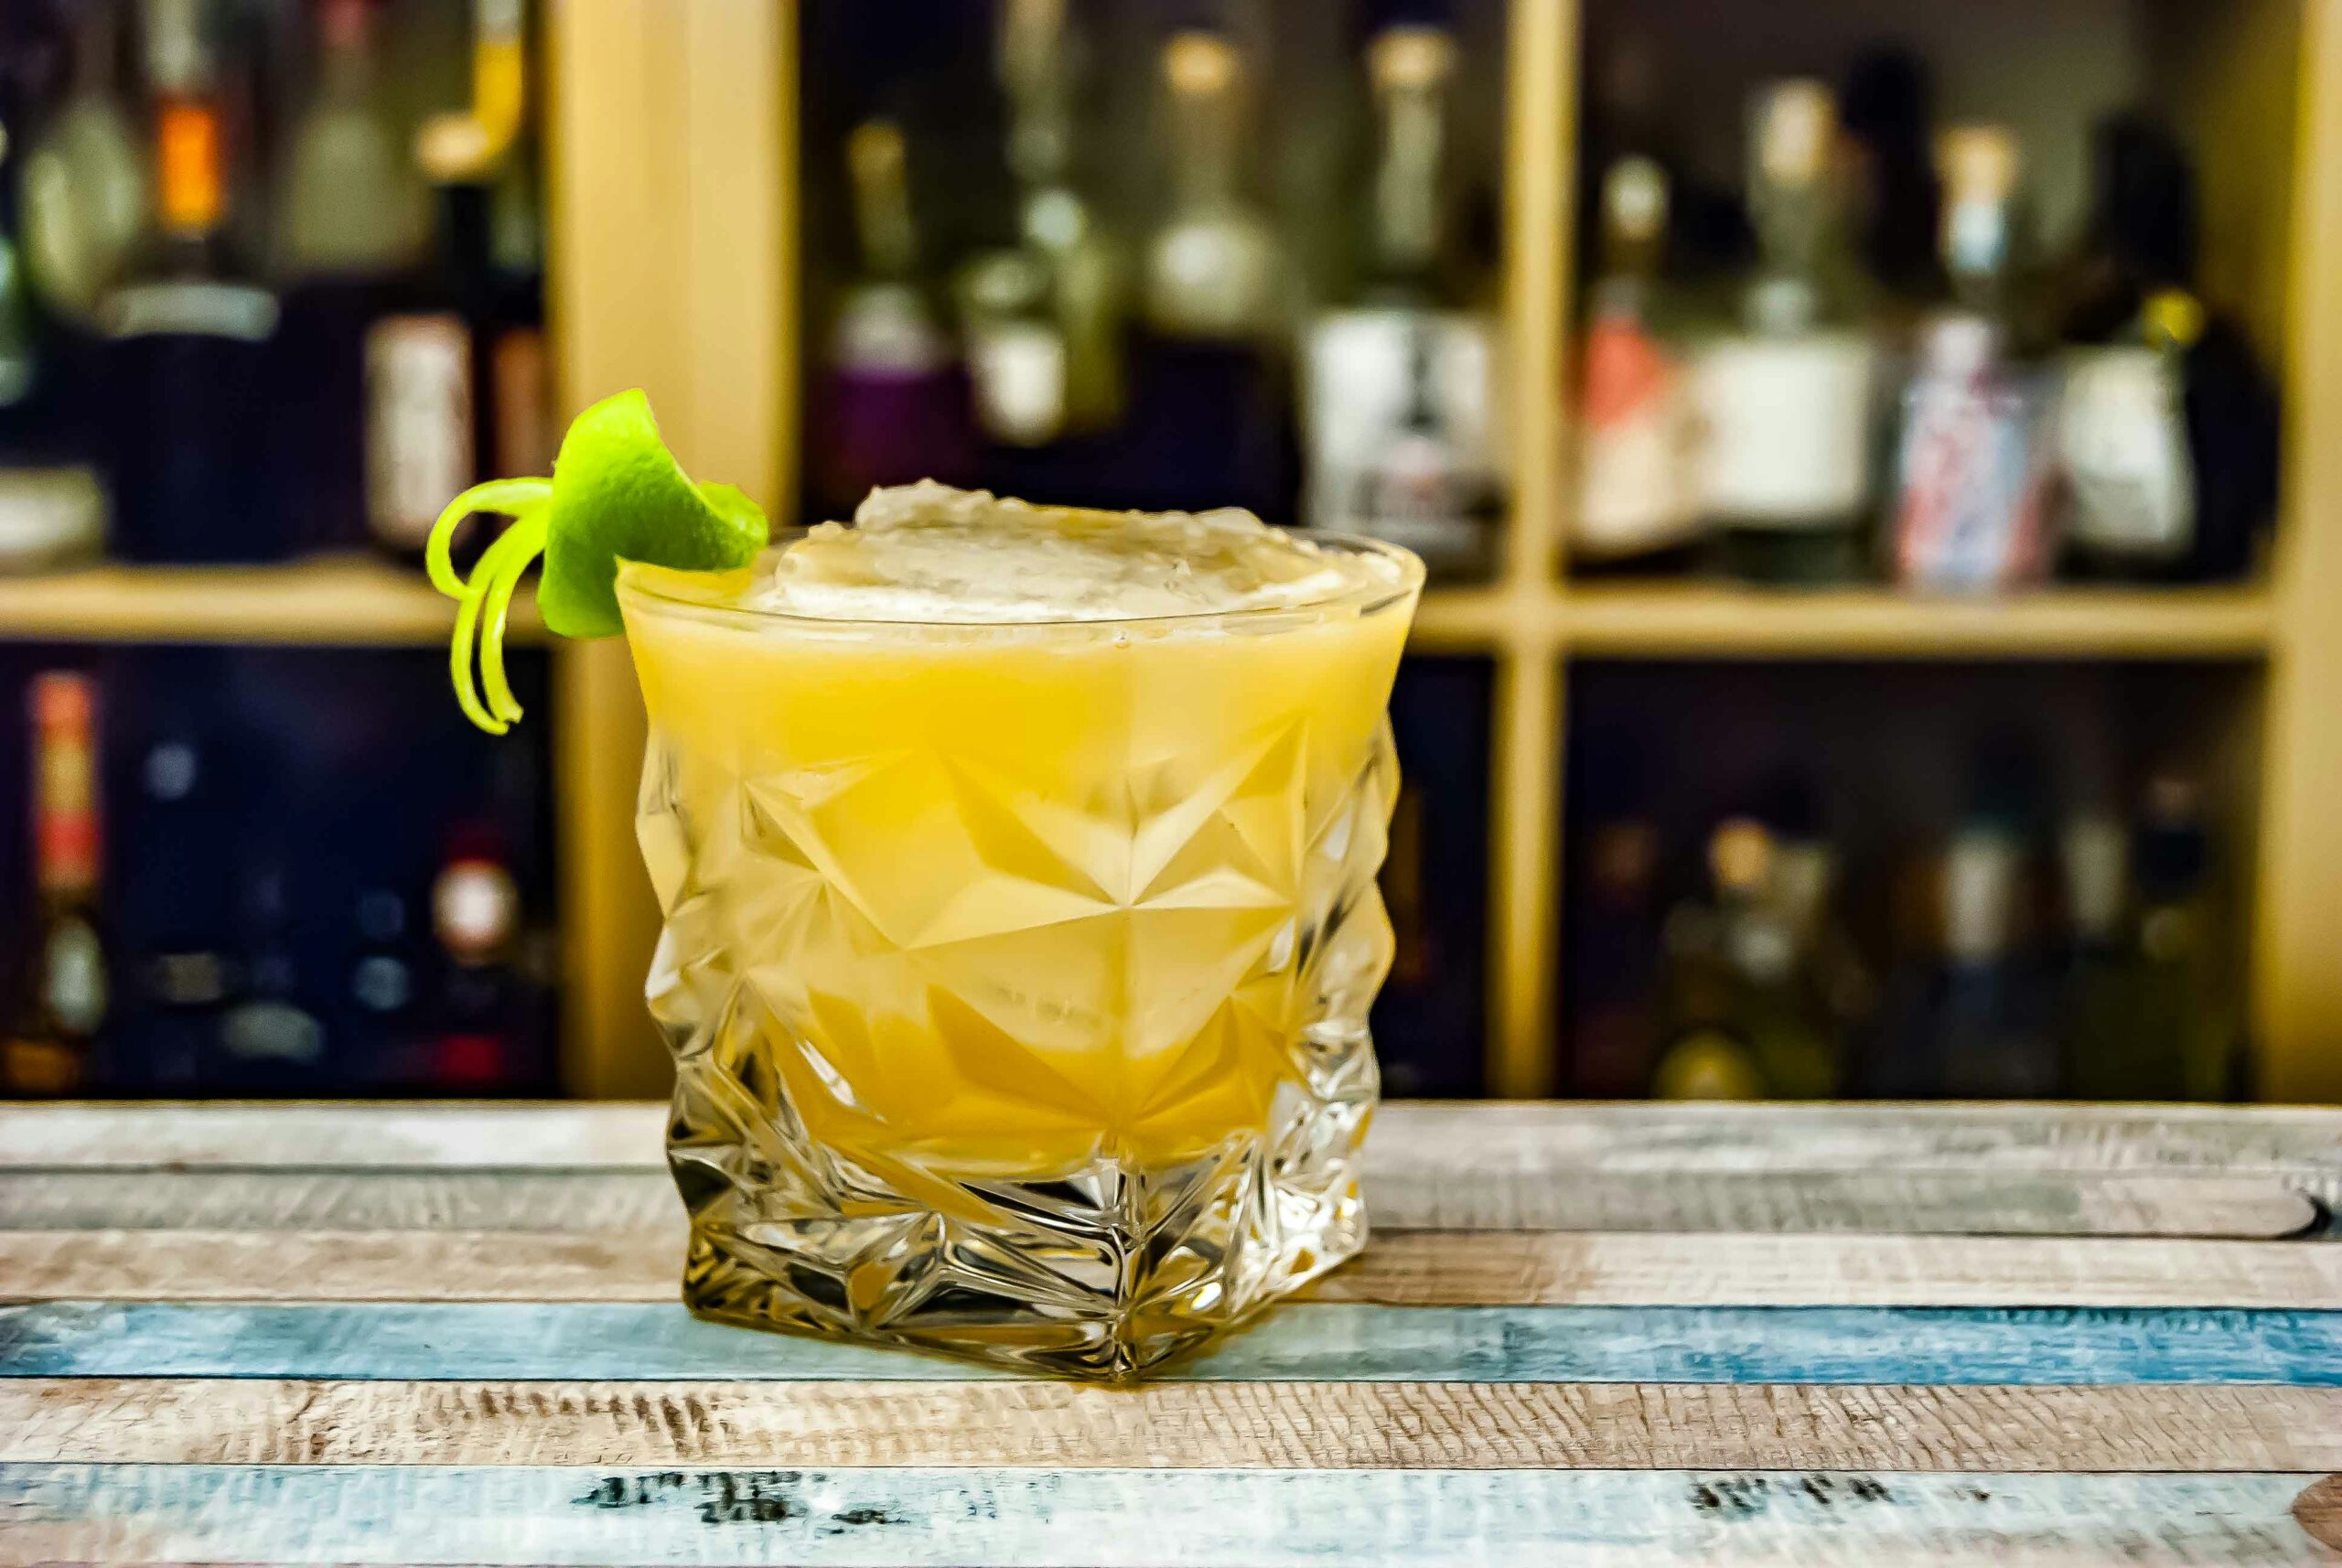 What mixes well with tequila? Make a tequila sweet and sour for a citrusy and tangy flavor. Pictured: A tequila sour